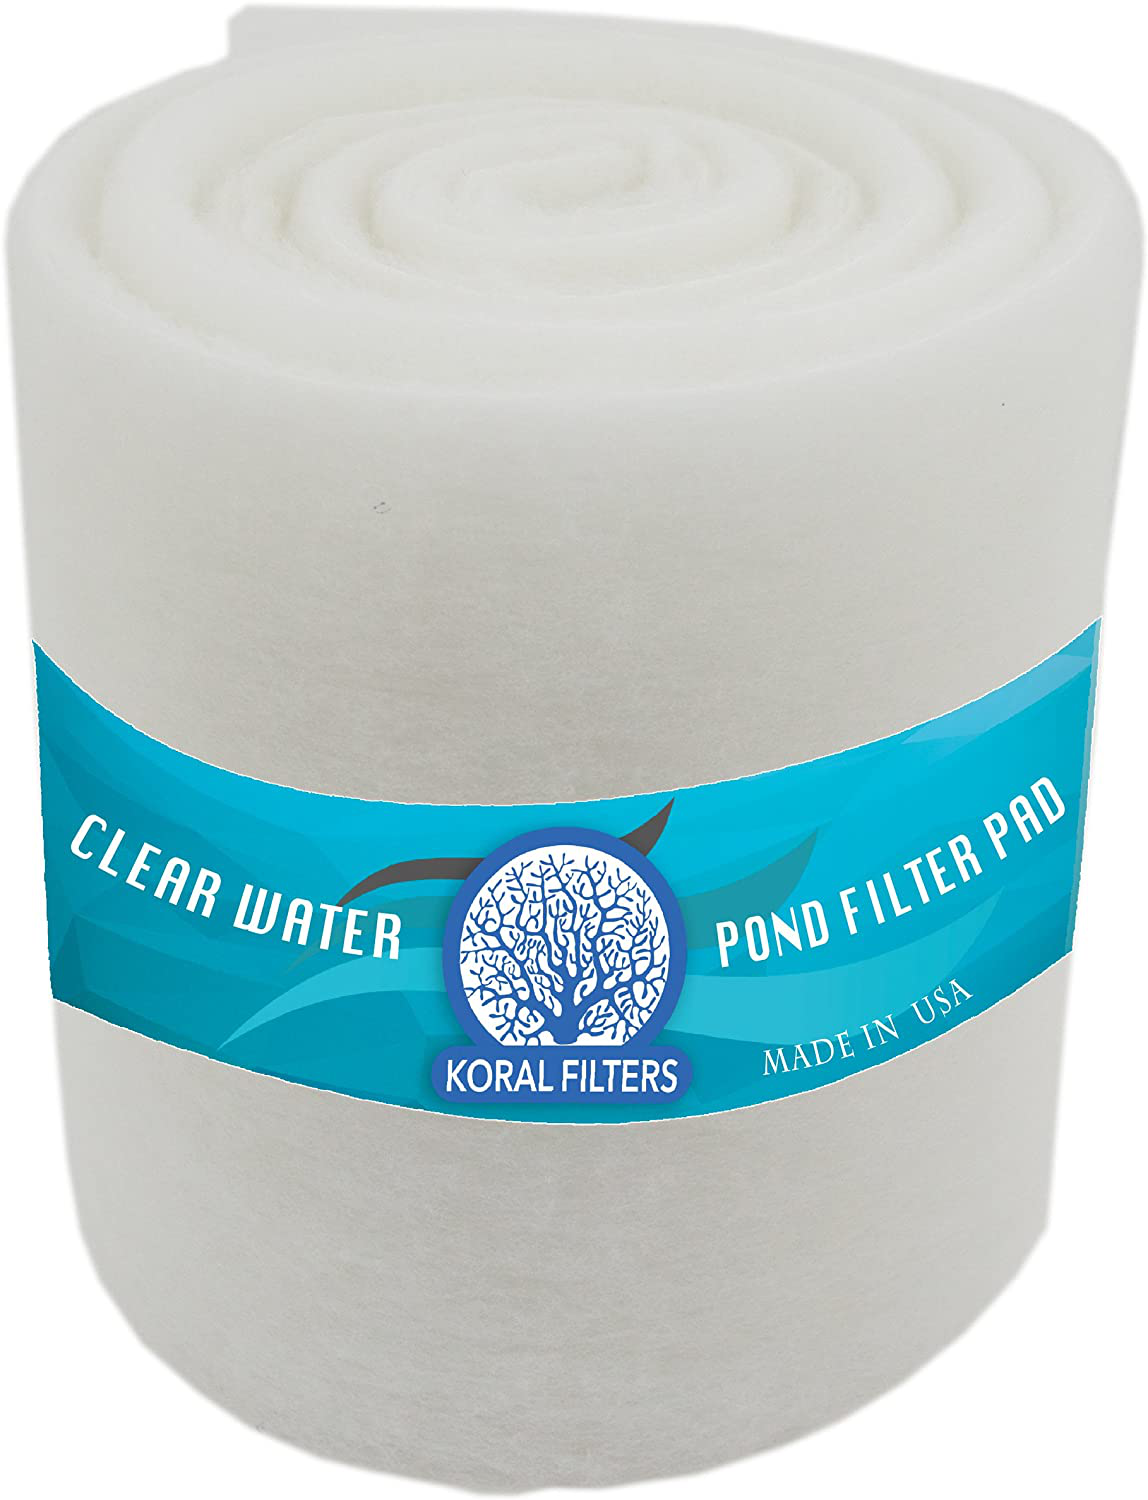 Koral Filters PRO Koi Pond Filter Pad Media Roll - Blue Bonded - 12 Inches by 72 Inches (6 Ft) by 1.25 Inches - Cut to Fit - Durable - Fish and Reef Aquarium Compatible Animals & Pet Supplies > Pet Supplies > Fish Supplies > Aquarium Filters Koral Filters Dye-Free 4ft 